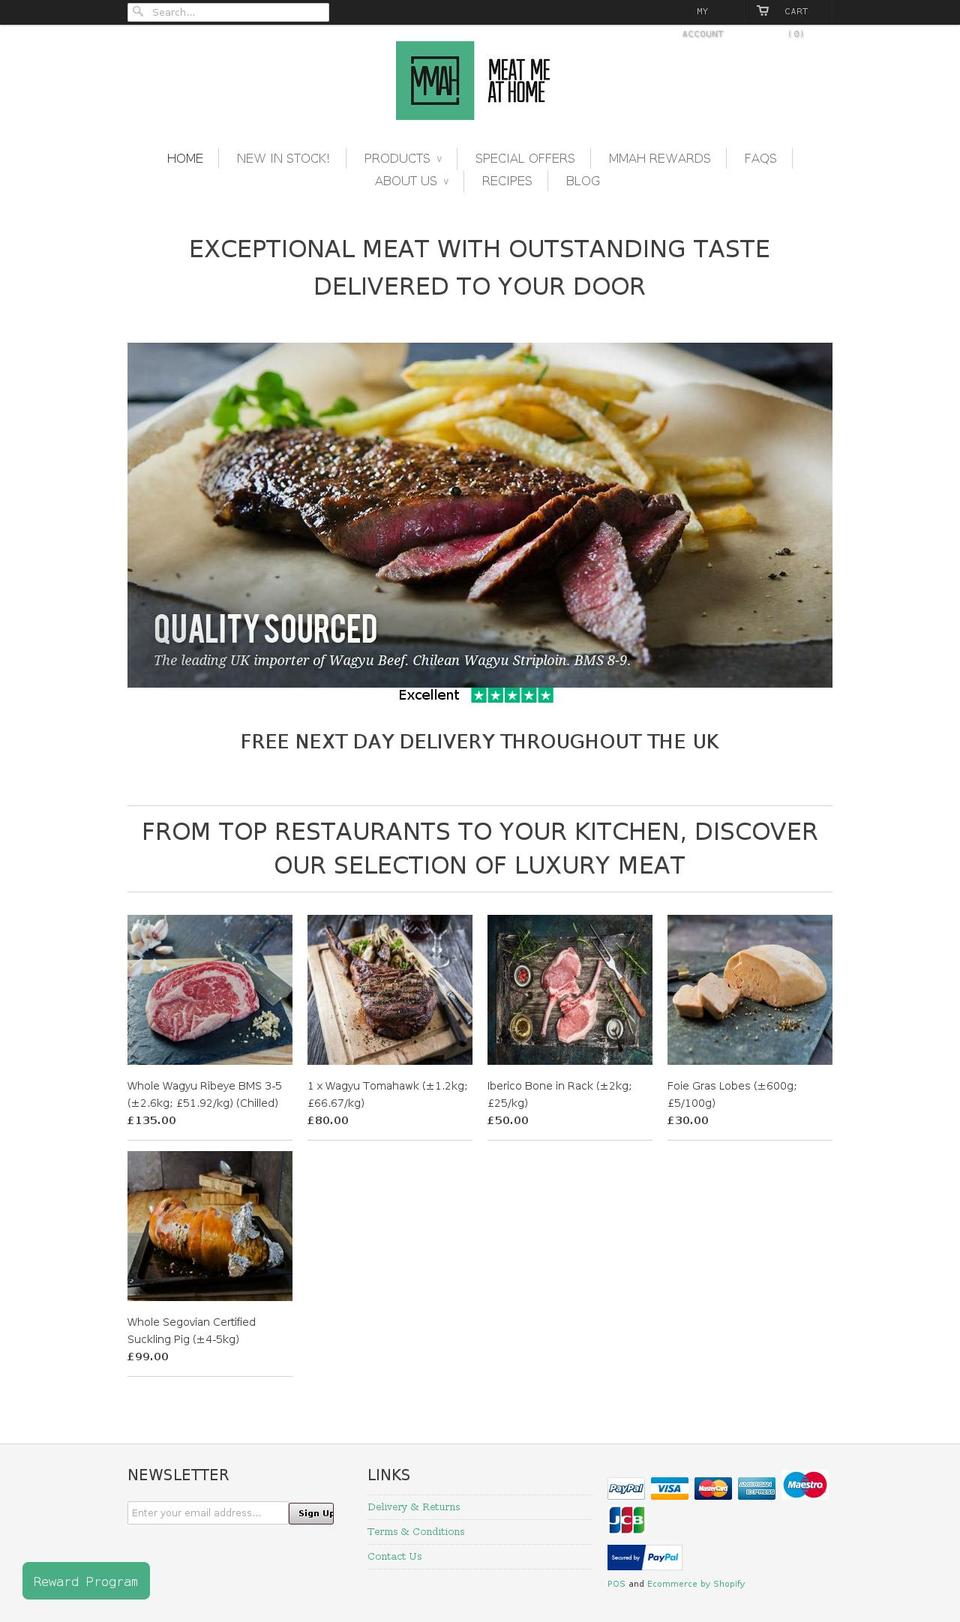 Meat Me at Home - V1.1 (App install) Shopify theme site example meetmeathome.com